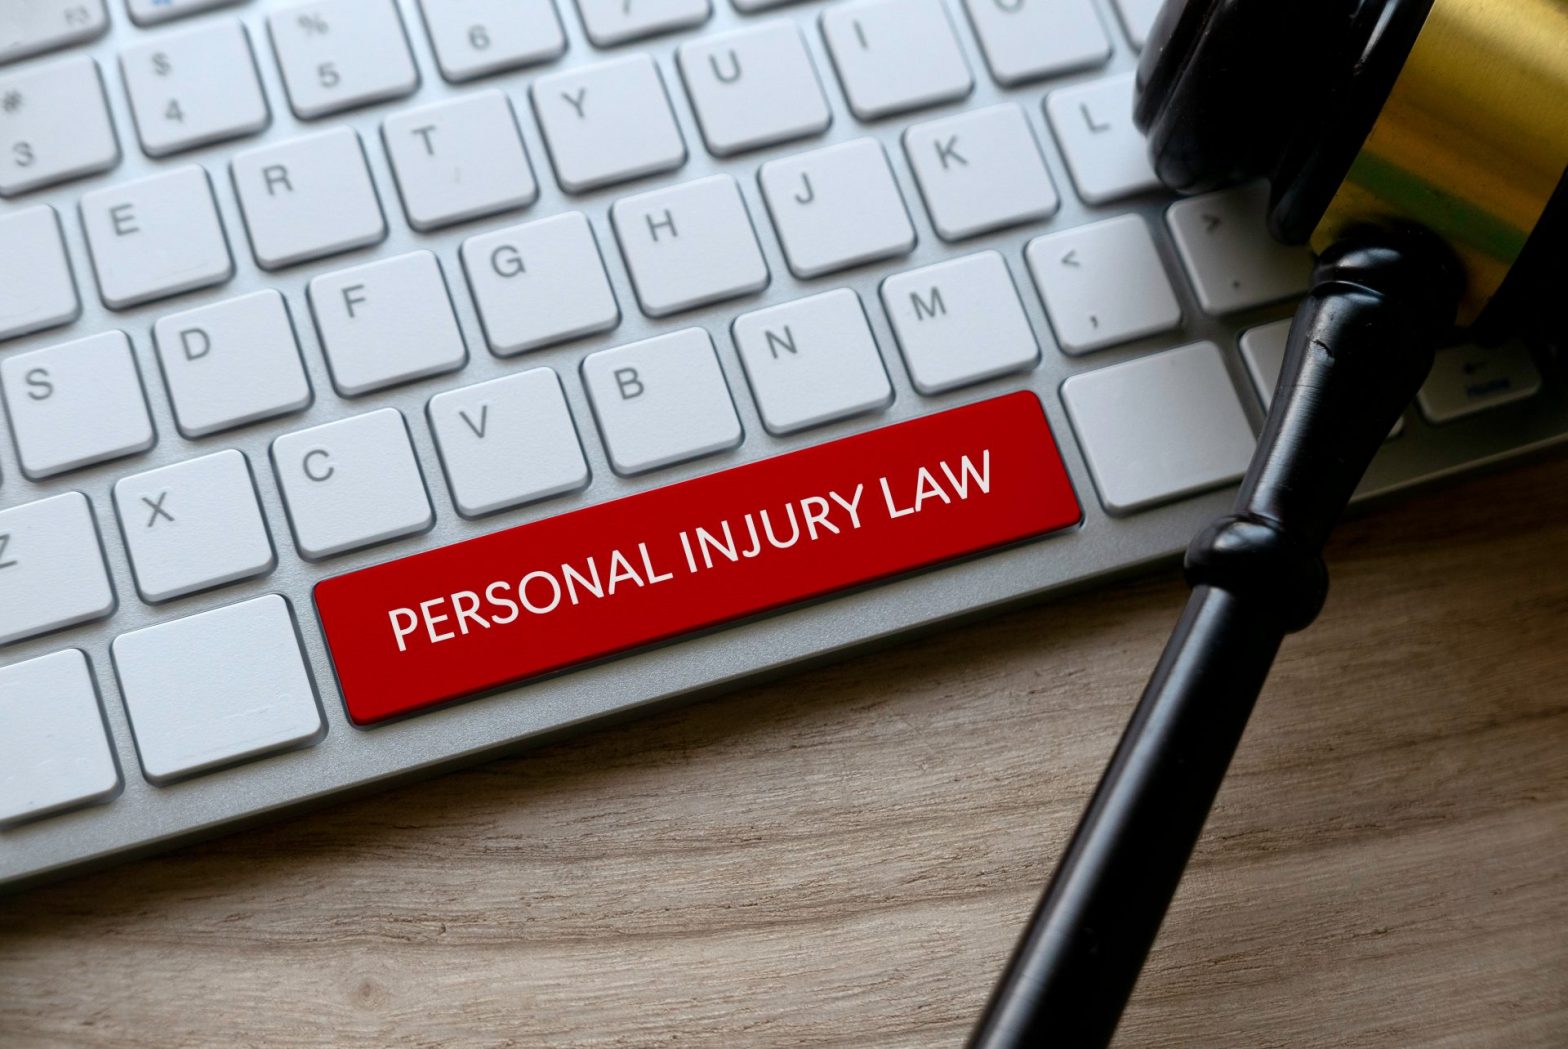 Personal injury leads